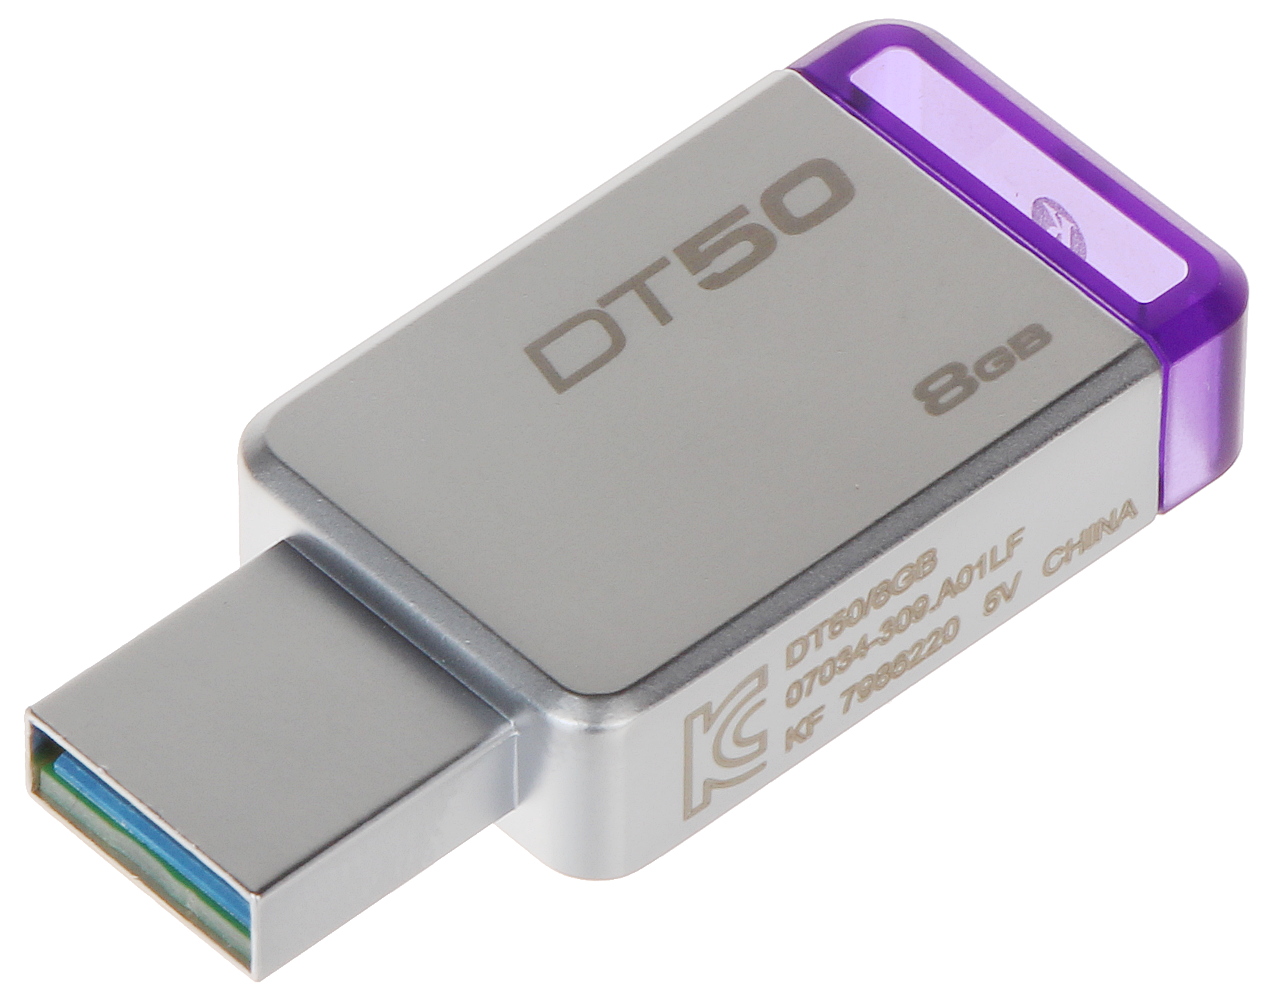 PENDRIVE USB 3.0 FD-8/DT50-KING 8 GB USB 3.1/3.0 KINGS... - PenDrives and  Memory Cards - Delta